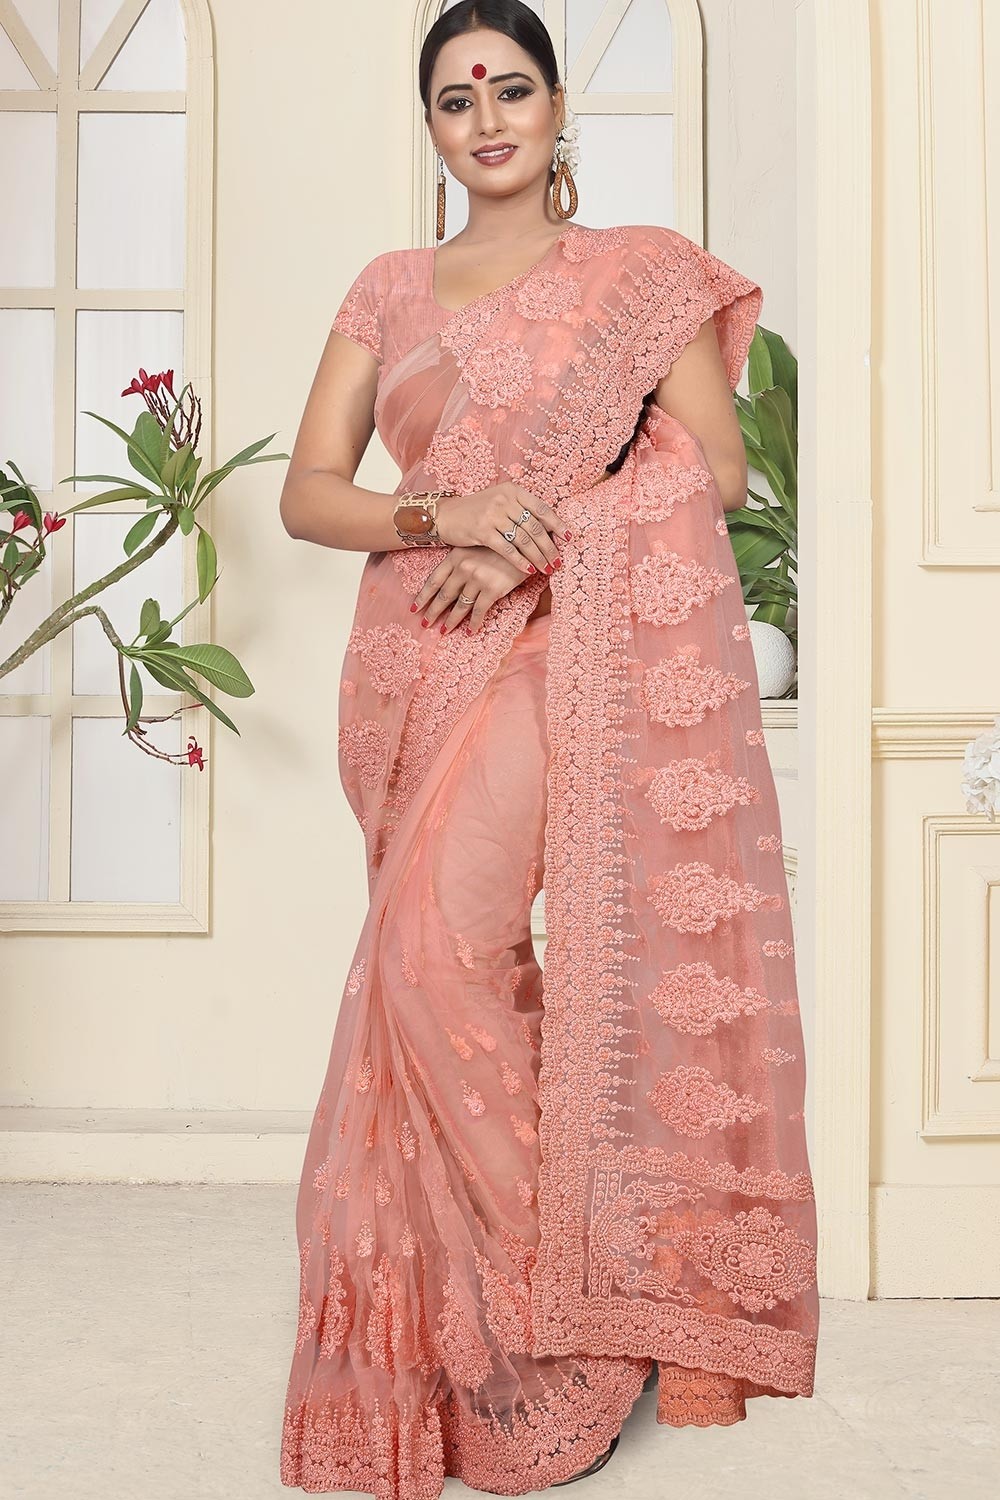 Shop the Hottest Peach Saree with Contrast Blouse Online Now